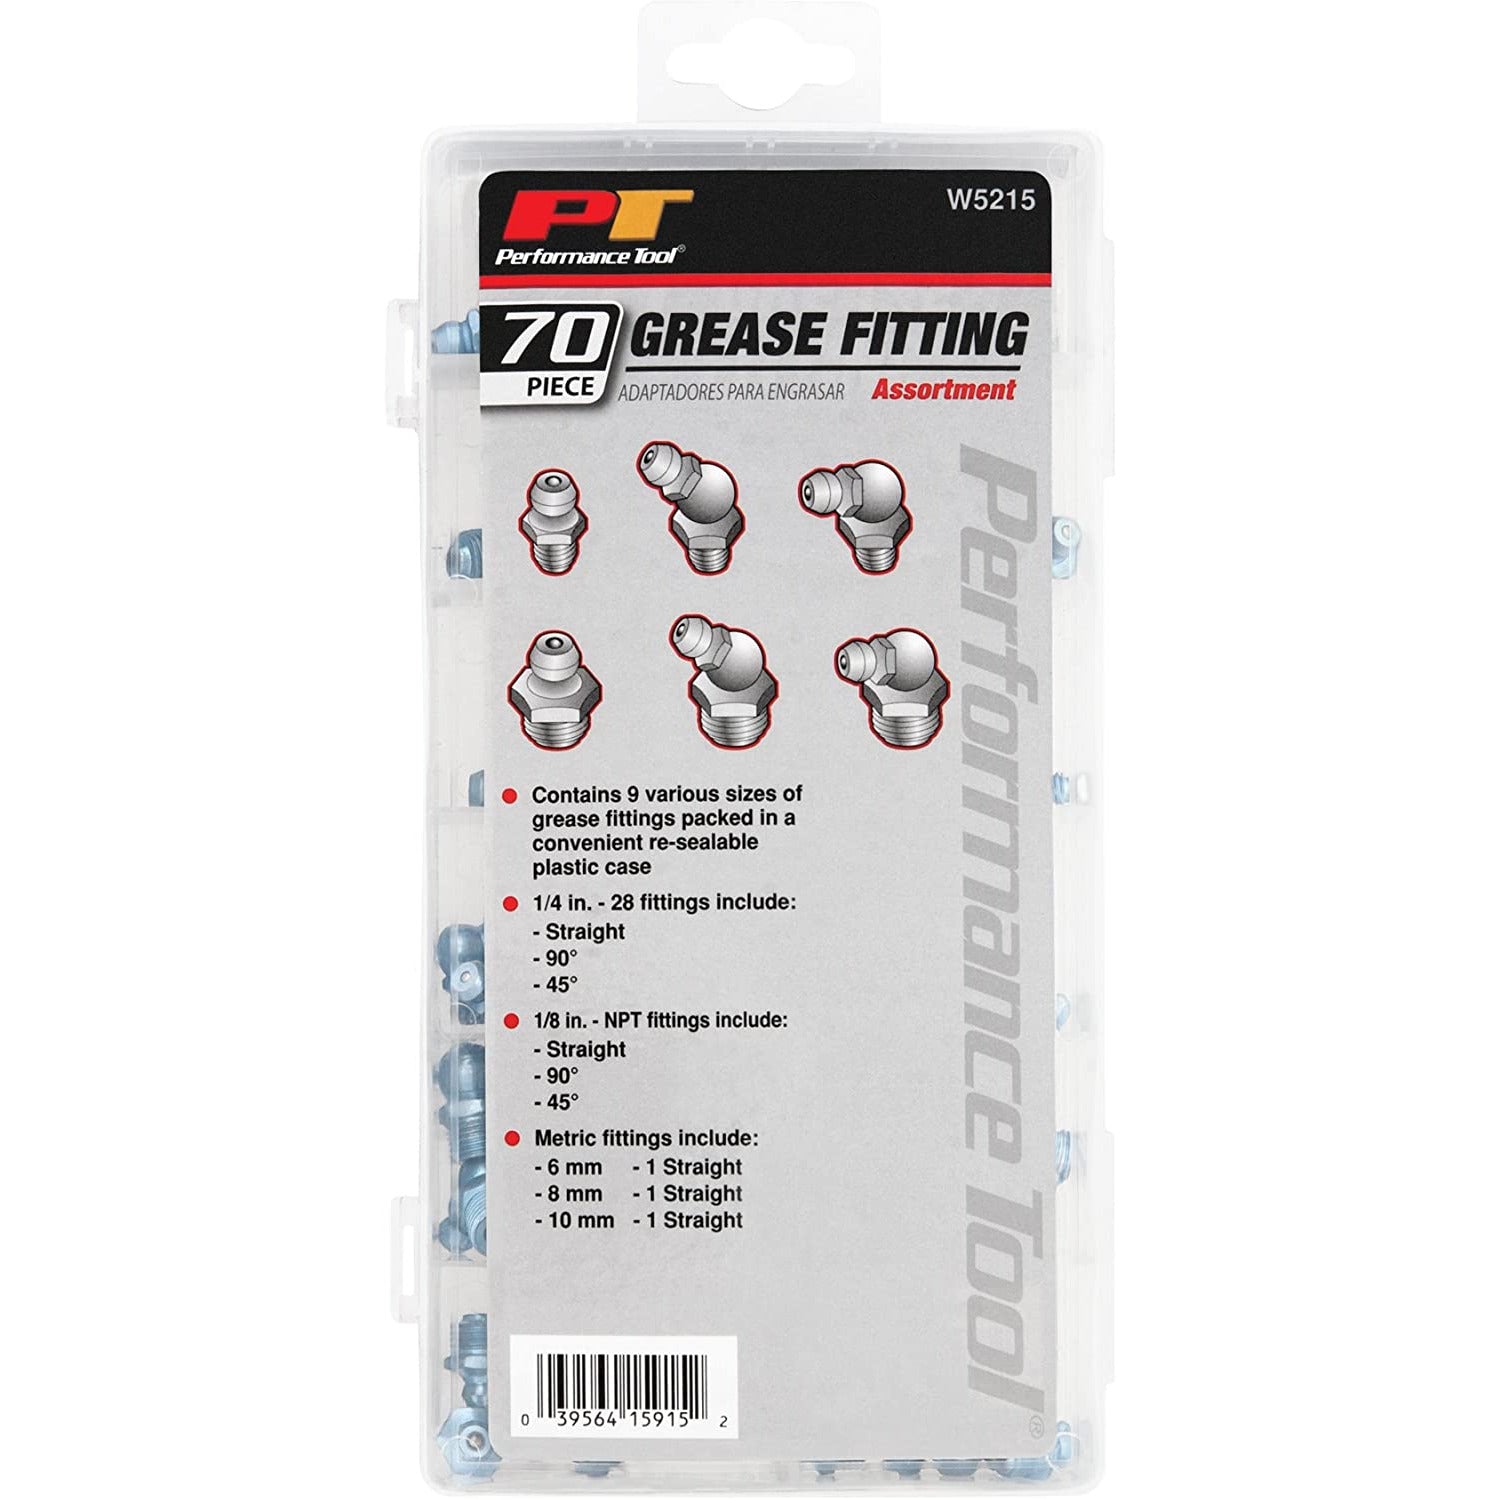 ET WILW5215 Performance Tool Grease Fitting Assortment Kit (70 pc)